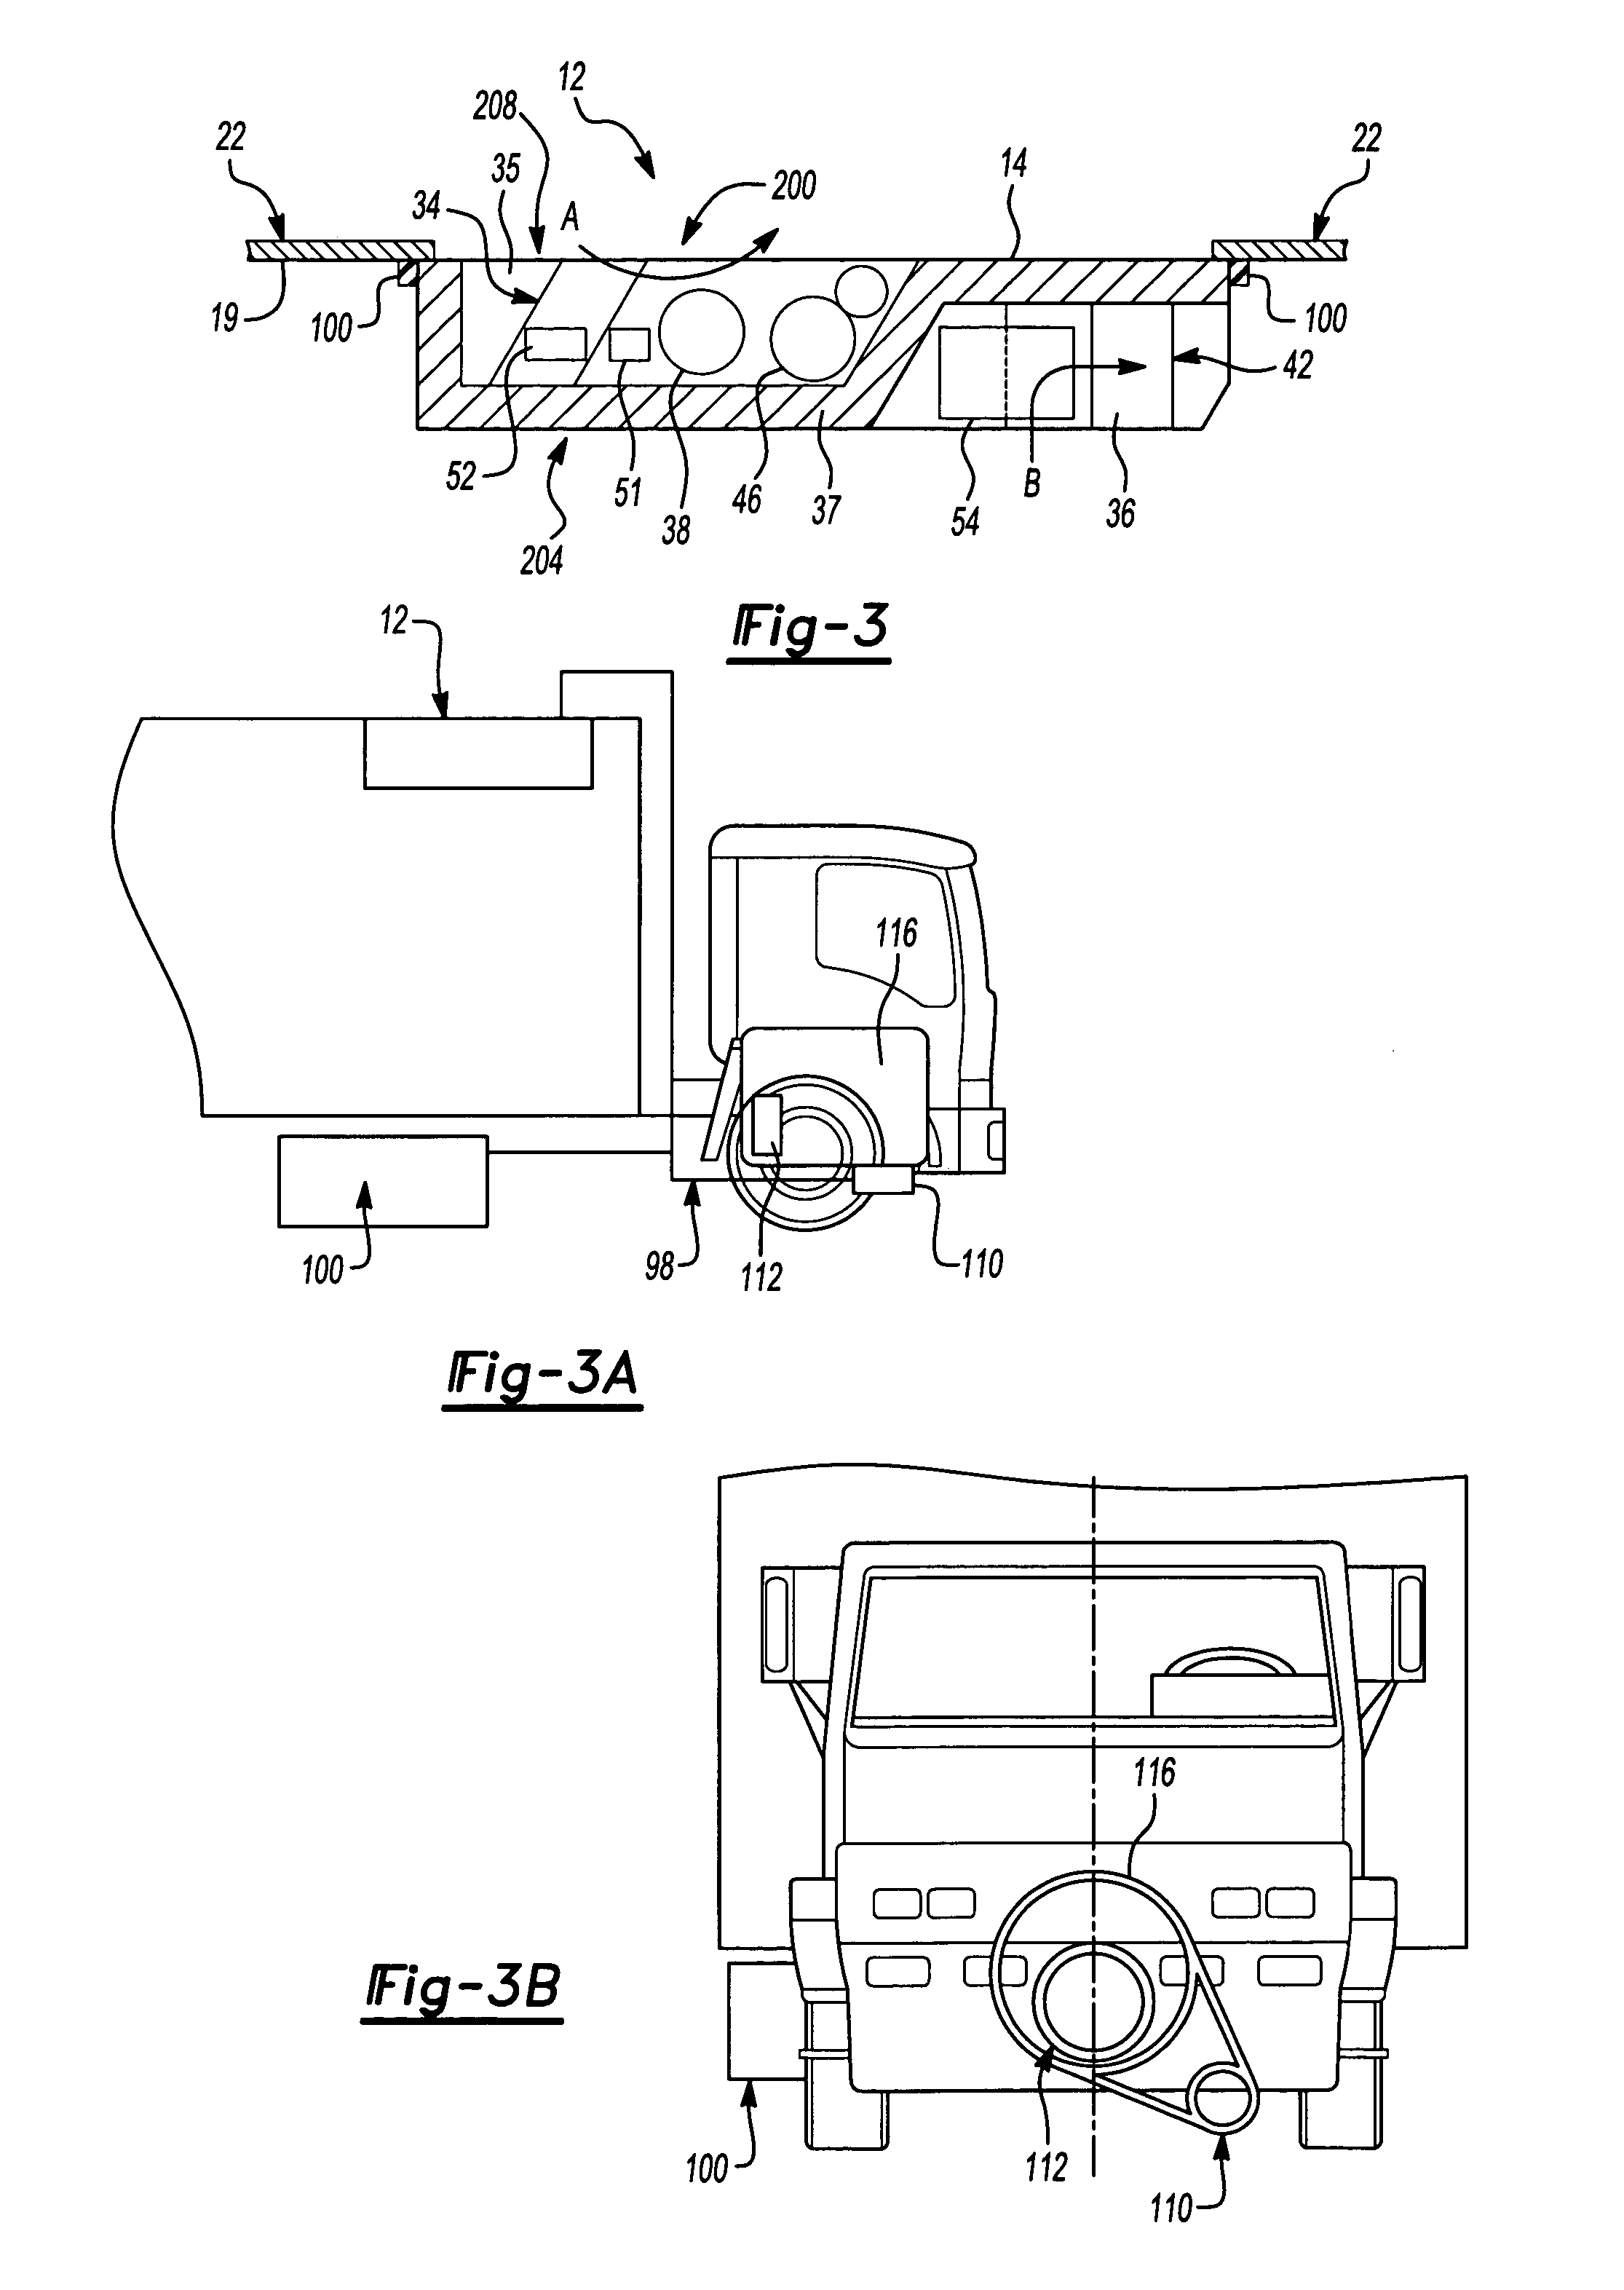 Self-contained refrigeration unit